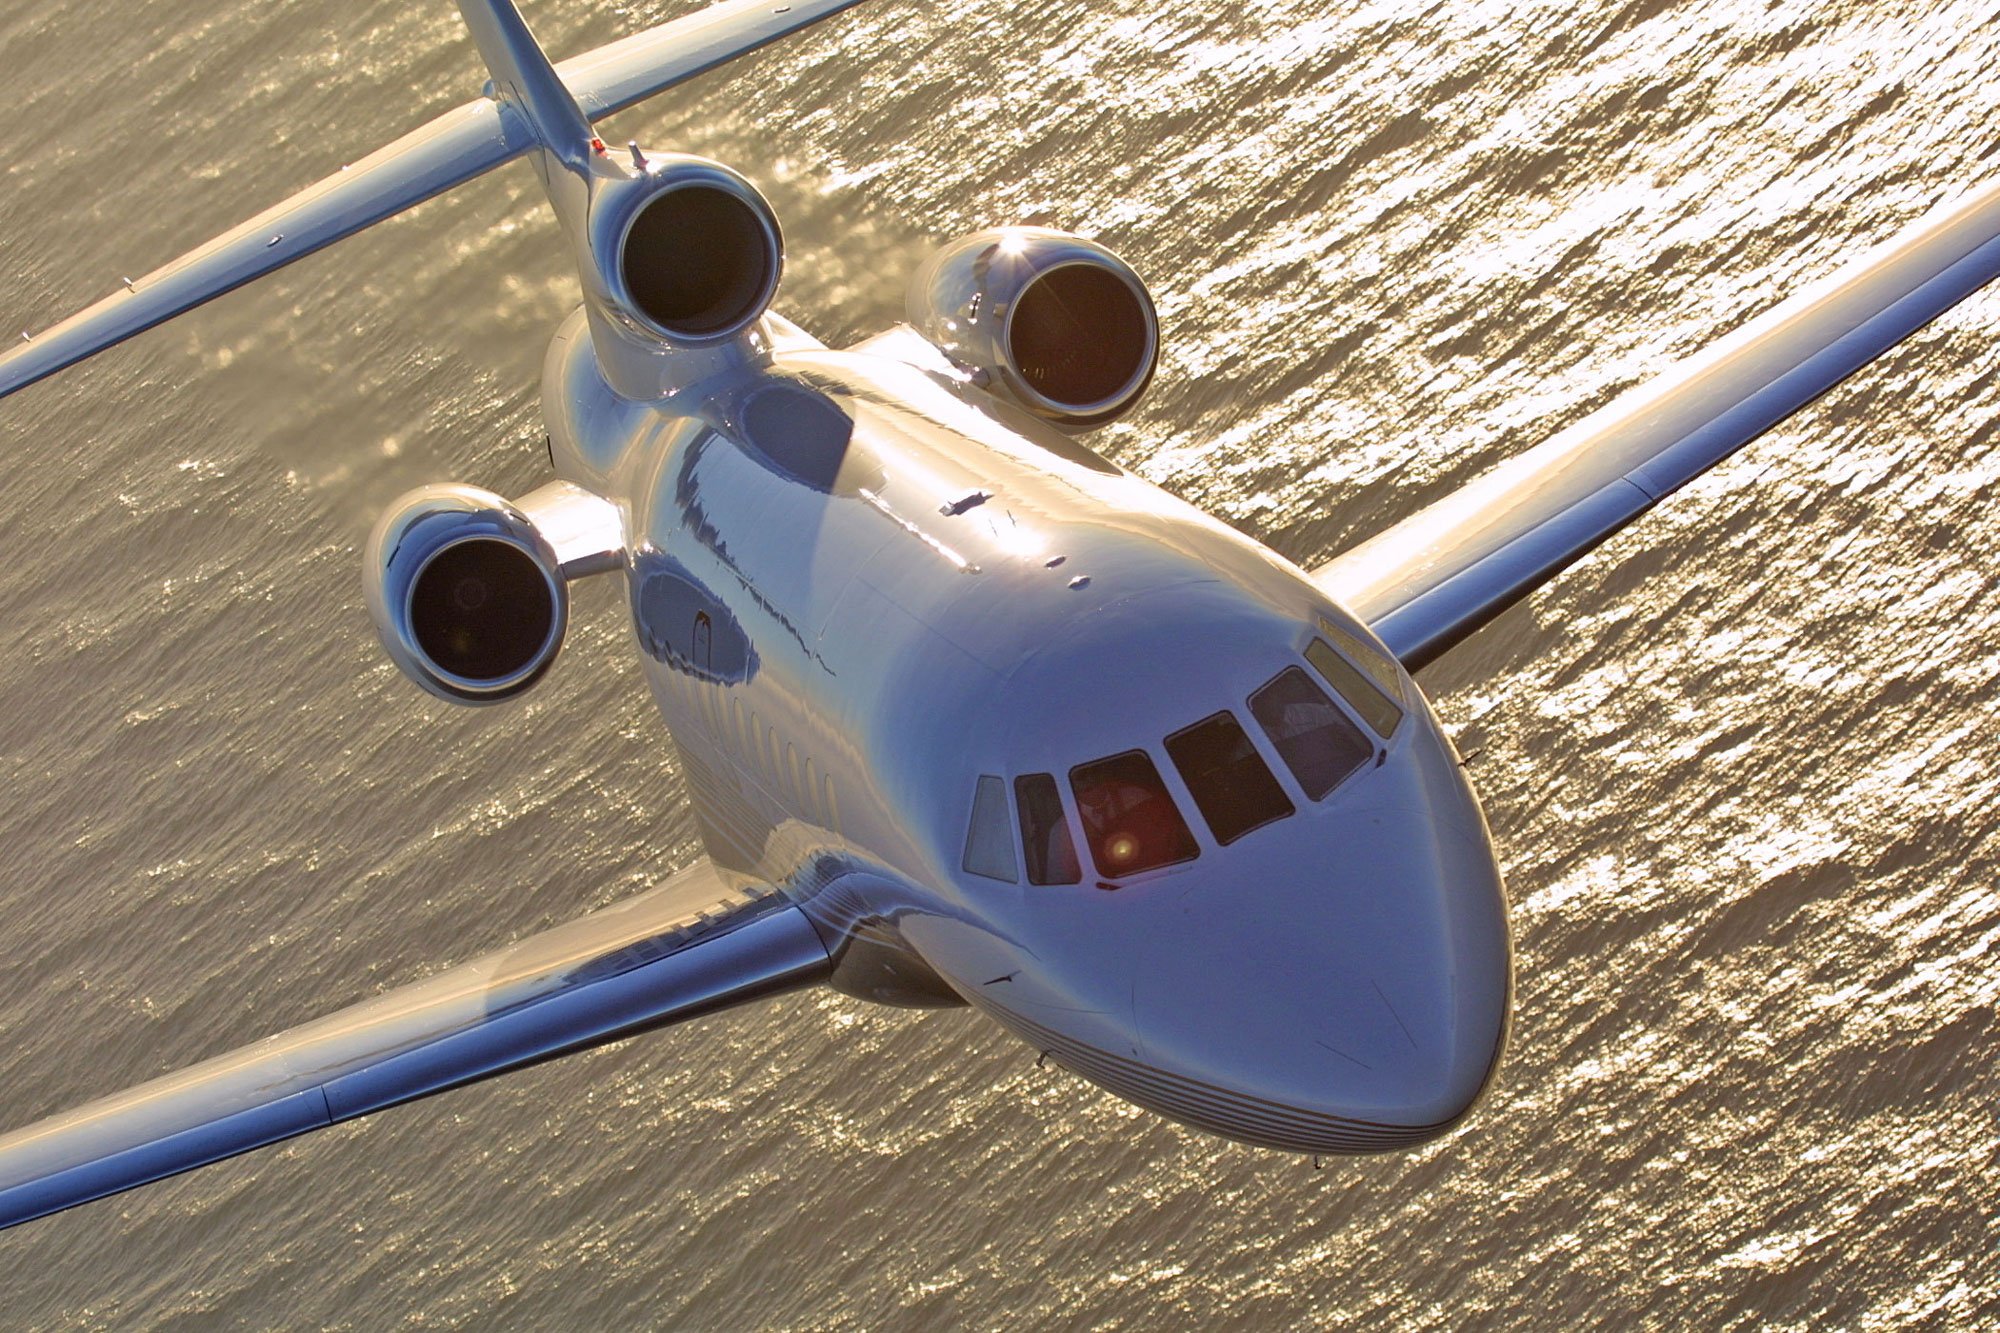 Falcon 900DX For sale looking for falcon 900EX.jpg